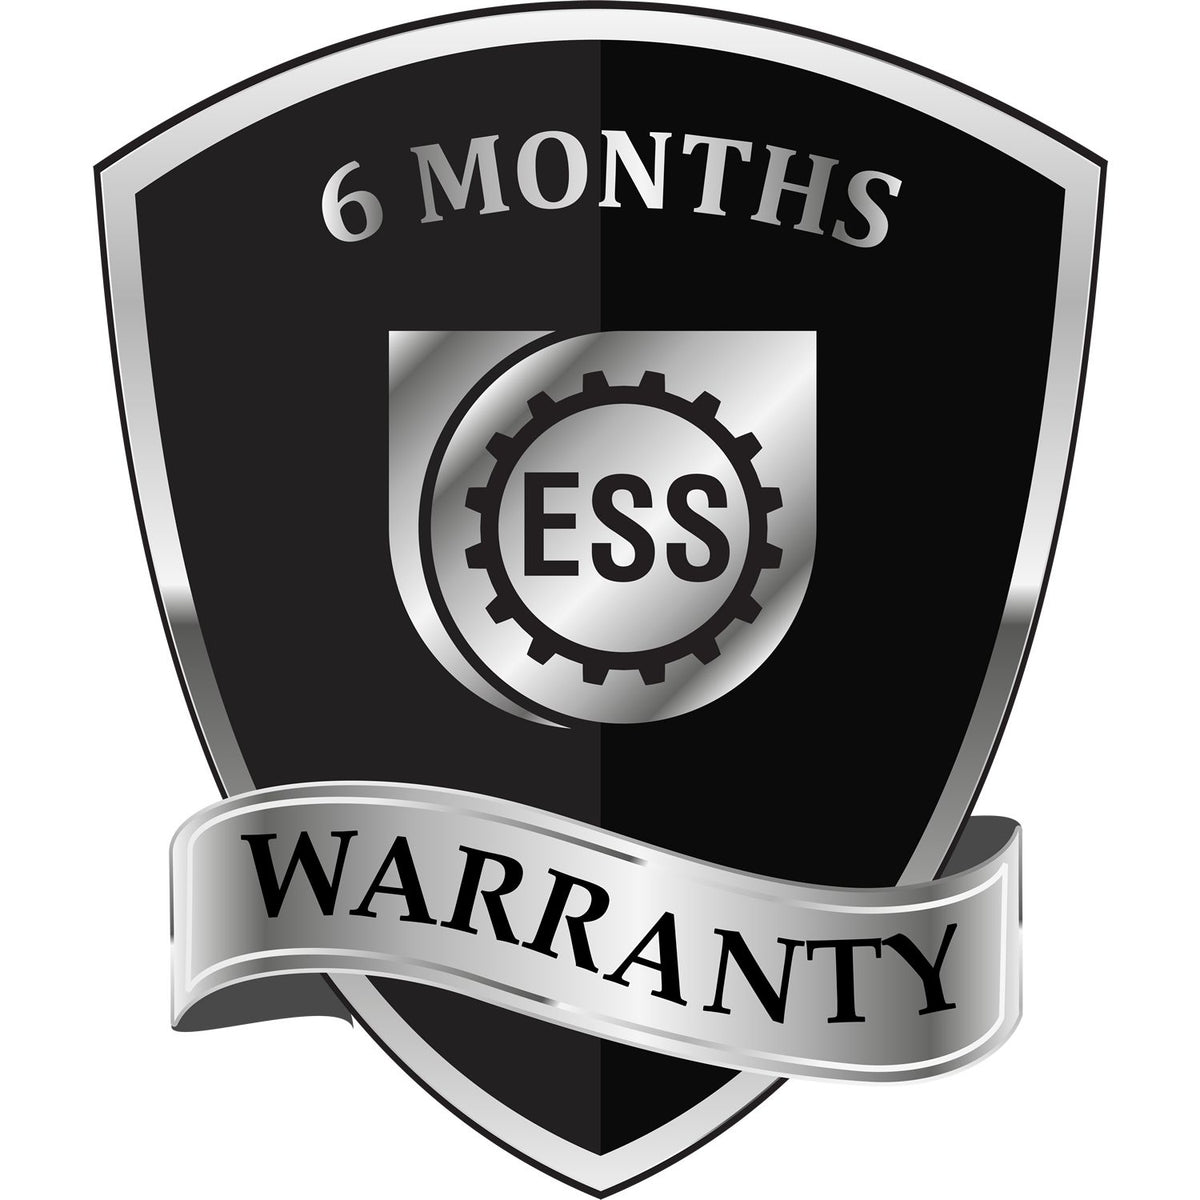 A black and silver badge or emblem showing warranty information for the New Jersey Professional Geologist Seal Stamp